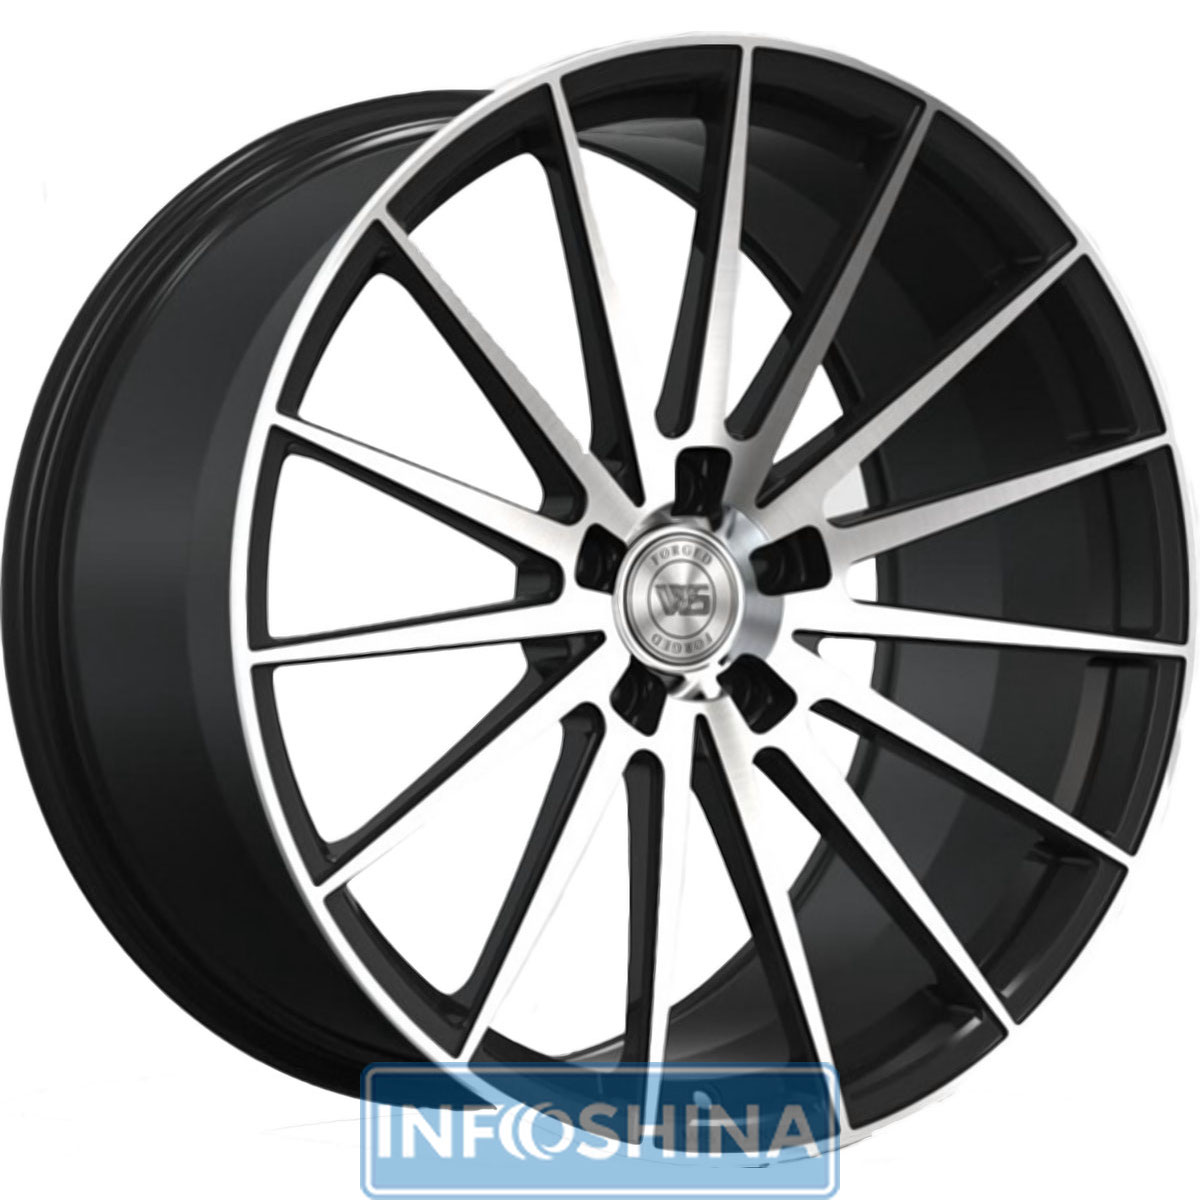 Купить диски WS Forged WS2116 Satin Black With Machined Face R20 W9 PCD5x112 ET30 DIA66.6